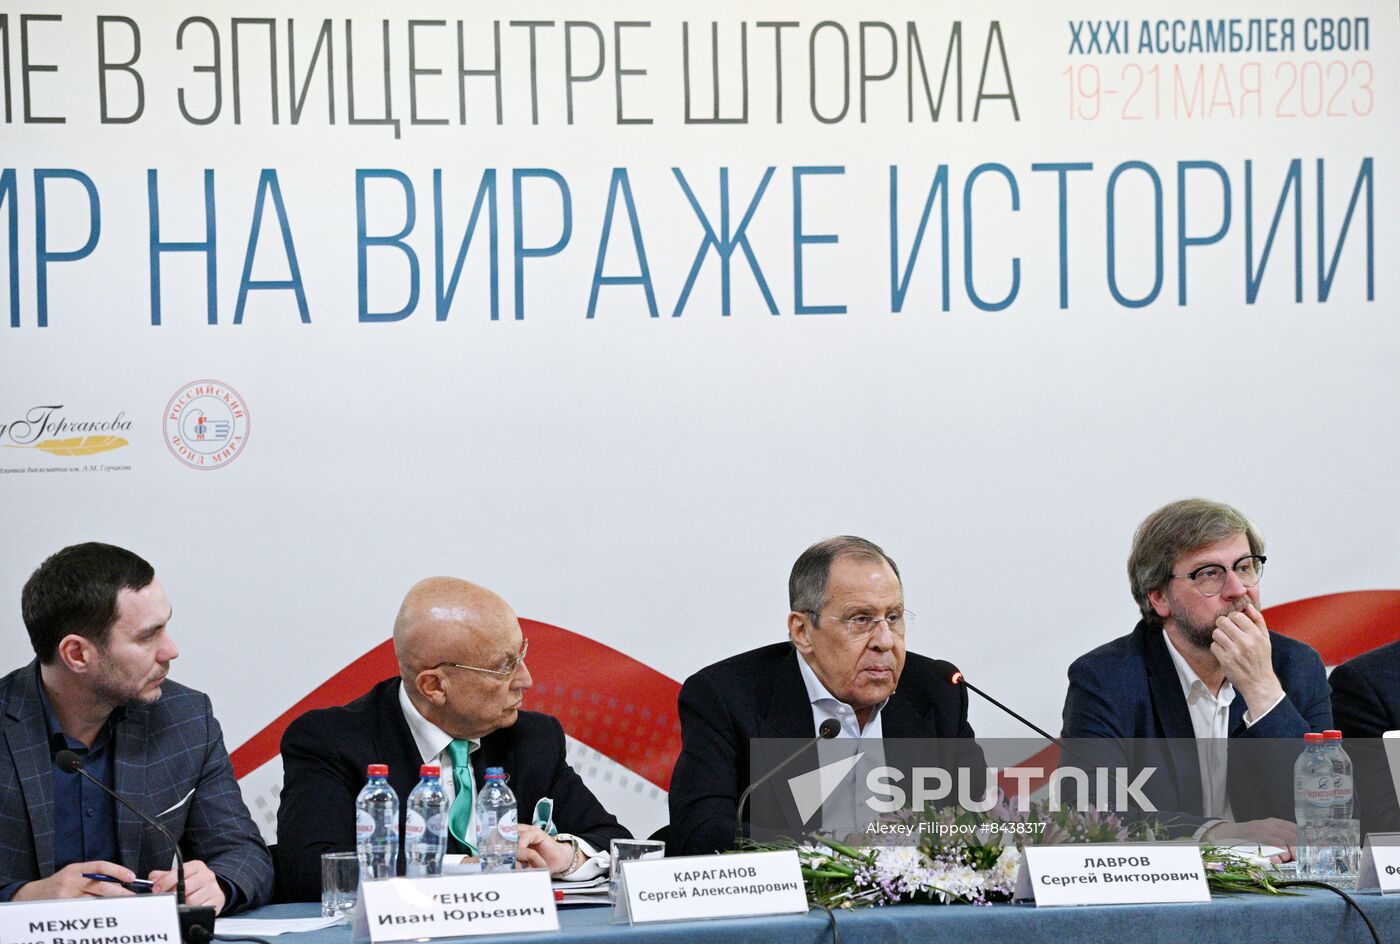 Russia Foreign Policy and Defence Congress